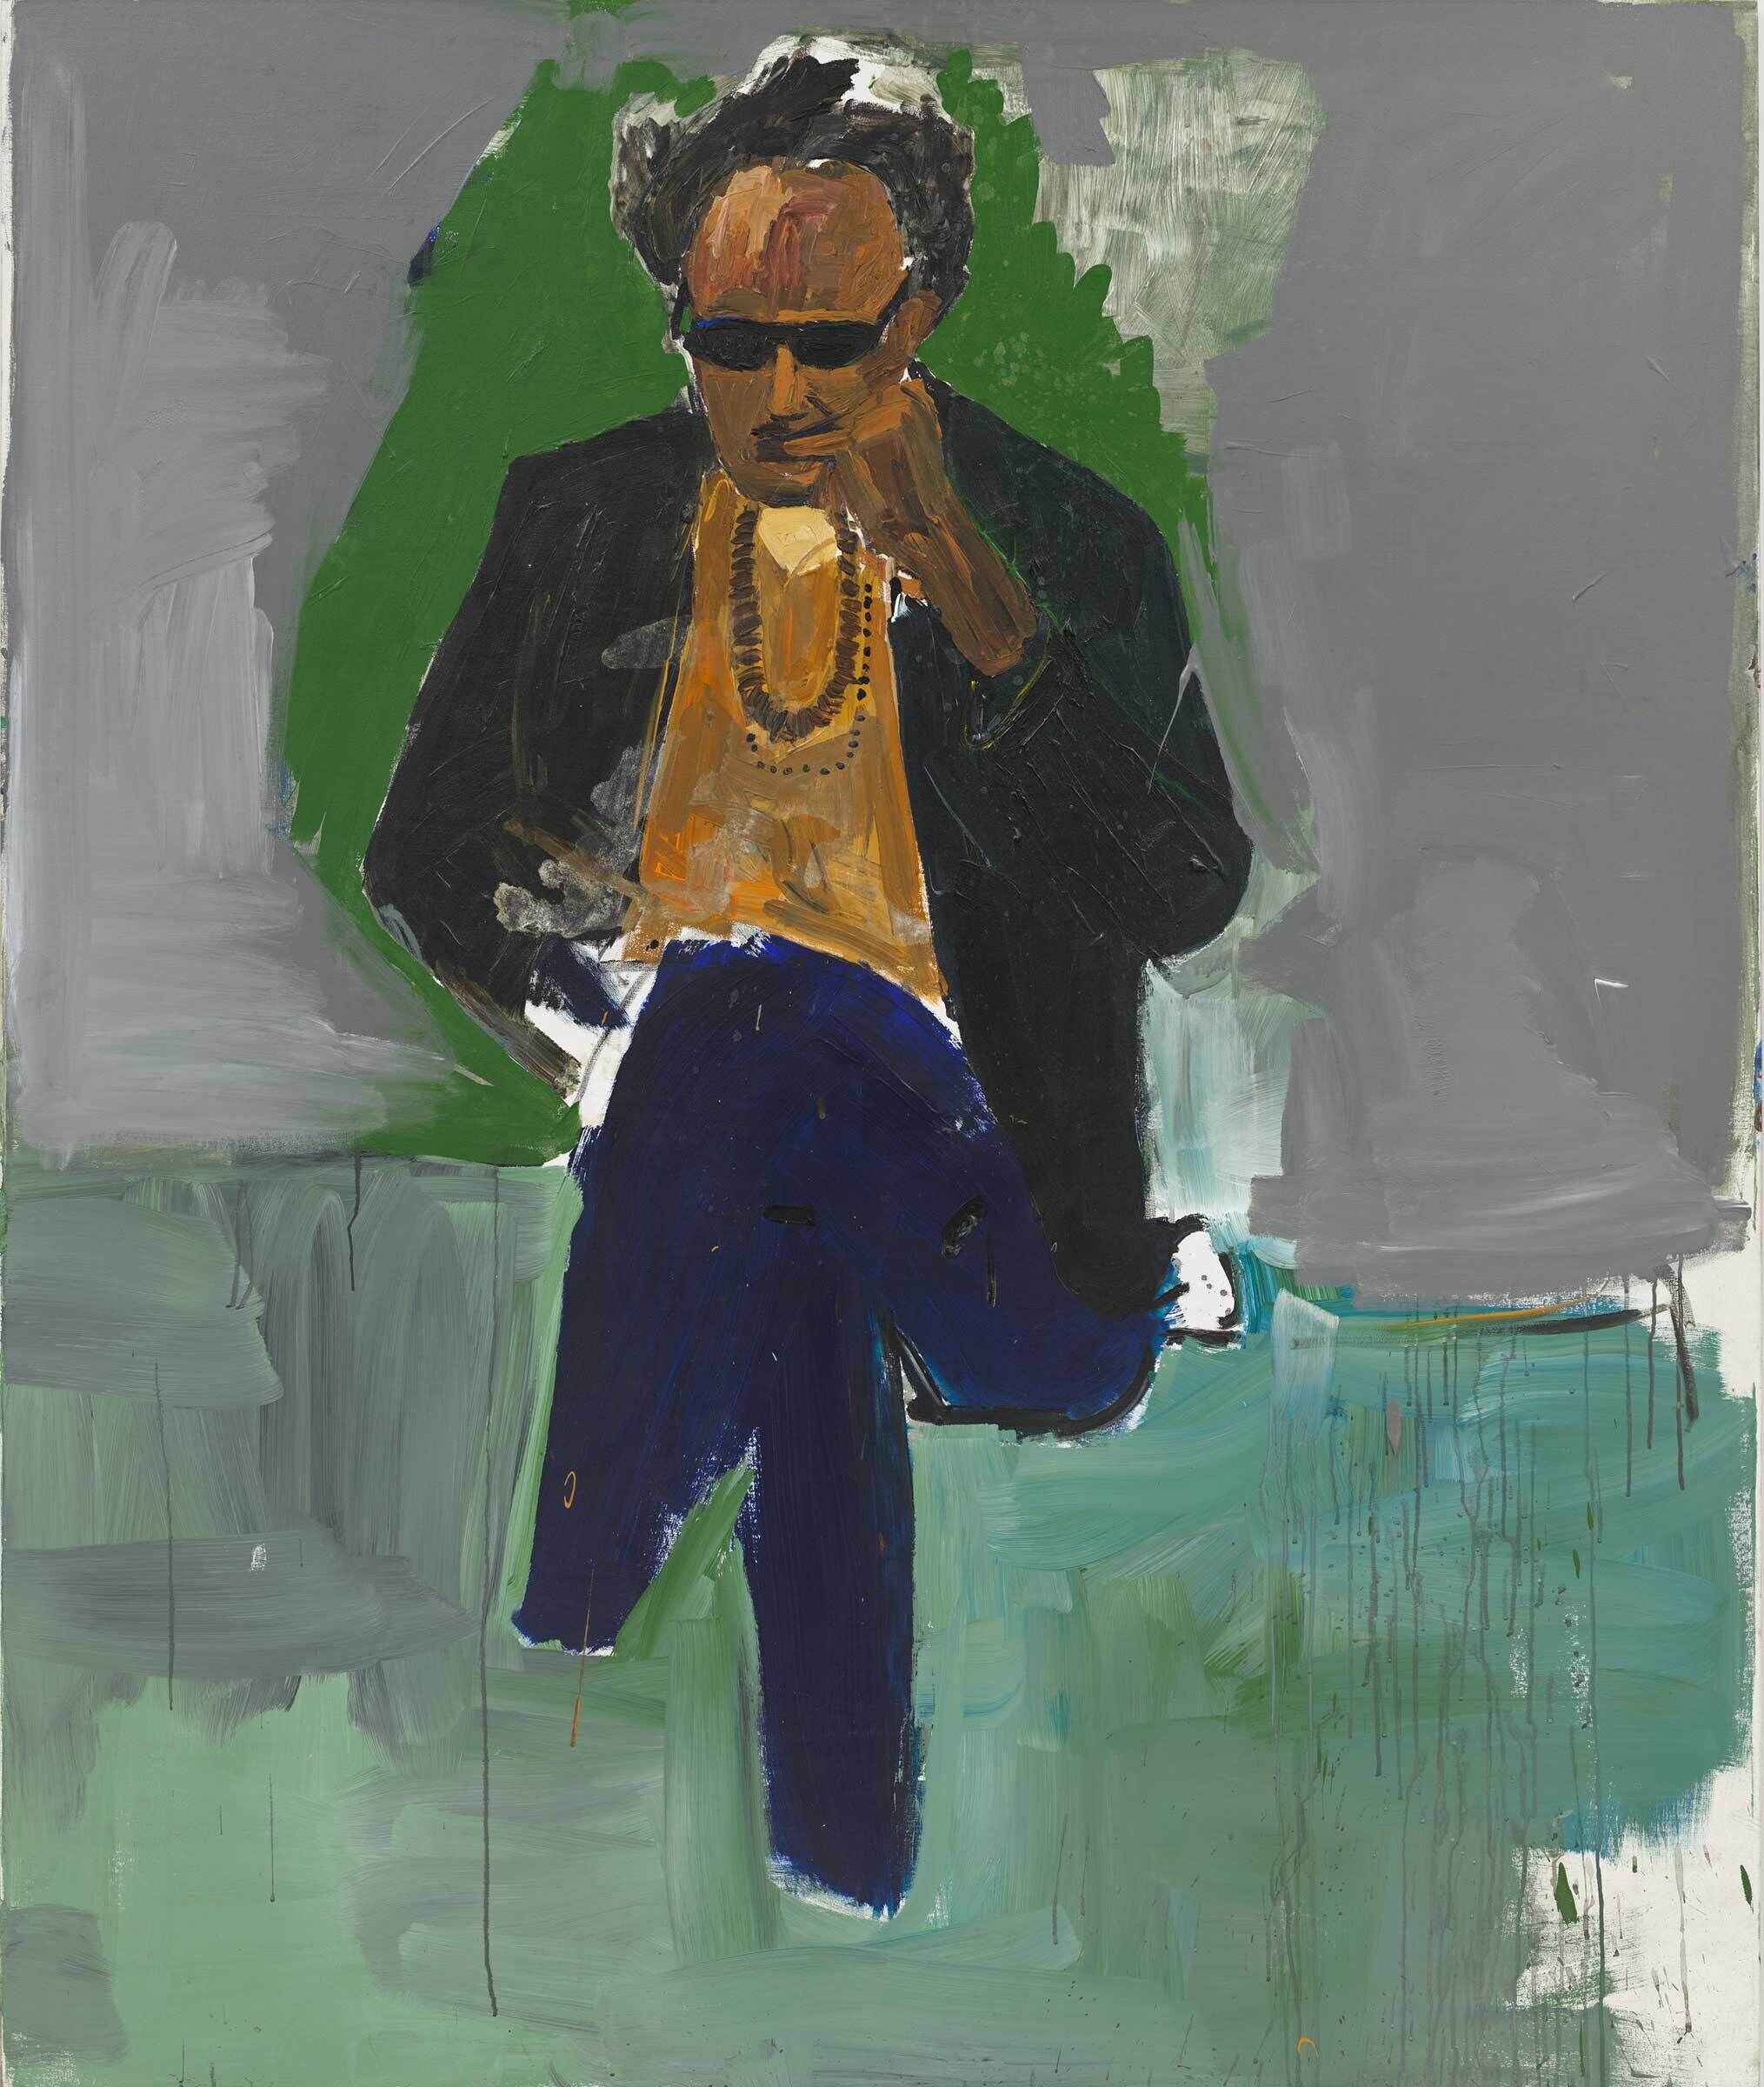 Steve Cannon, a Black man, sits with his legs crossed. He is wearing a mustard colored shirt, a black jacket, jeans, sunglasses, and a brown necklace. The background is grey and green.